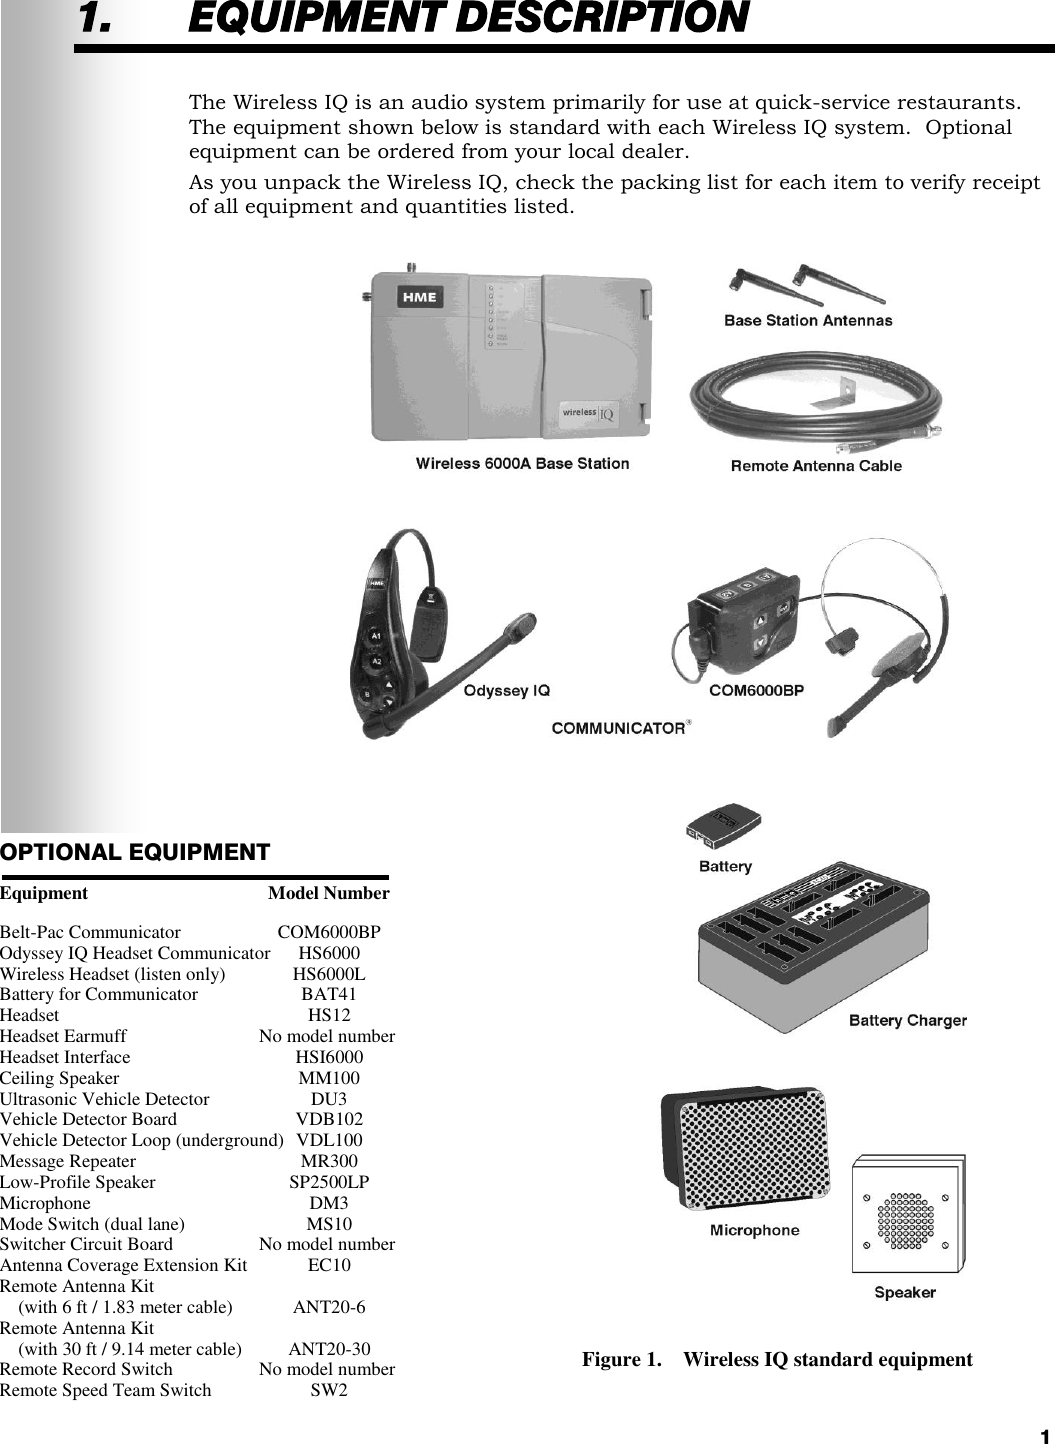   1 1. EQUIPMENT DESCRIPTION The Wireless IQ is an audio system primarily for use at quick-service restaurants.  The equipment shown below is standard with each Wireless IQ system.  Optional equipment can be ordered from your local dealer.   As you unpack the Wireless IQ, check the packing list for each item to verify receipt of all equipment and quantities listed.                                         Figure 1.    Wireless IQ standard equipment OPTIONAL EQUIPMENT  Equipment  Model Number  Belt-Pac Communicator  COM6000BP Odyssey IQ Headset Communicator  HS6000 Wireless Headset (listen only)  HS6000L Battery for Communicator  BAT41 Headset  HS12 Headset Earmuff  No model number Headset Interface  HSI6000 Ceiling Speaker  MM100 Ultrasonic Vehicle Detector  DU3 Vehicle Detector Board  VDB102 Vehicle Detector Loop (underground)  VDL100 Message Repeater  MR300 Low-Profile Speaker  SP2500LP Microphone  DM3 Mode Switch (dual lane)  MS10 Switcher Circuit Board  No model number  Antenna Coverage Extension Kit  EC10 Remote Antenna Kit      (with 6 ft / 1.83 meter cable)  ANT20-6 Remote Antenna Kit      (with 30 ft / 9.14 meter cable)  ANT20-30 Remote Record Switch  No model number Remote Speed Team Switch  SW2 